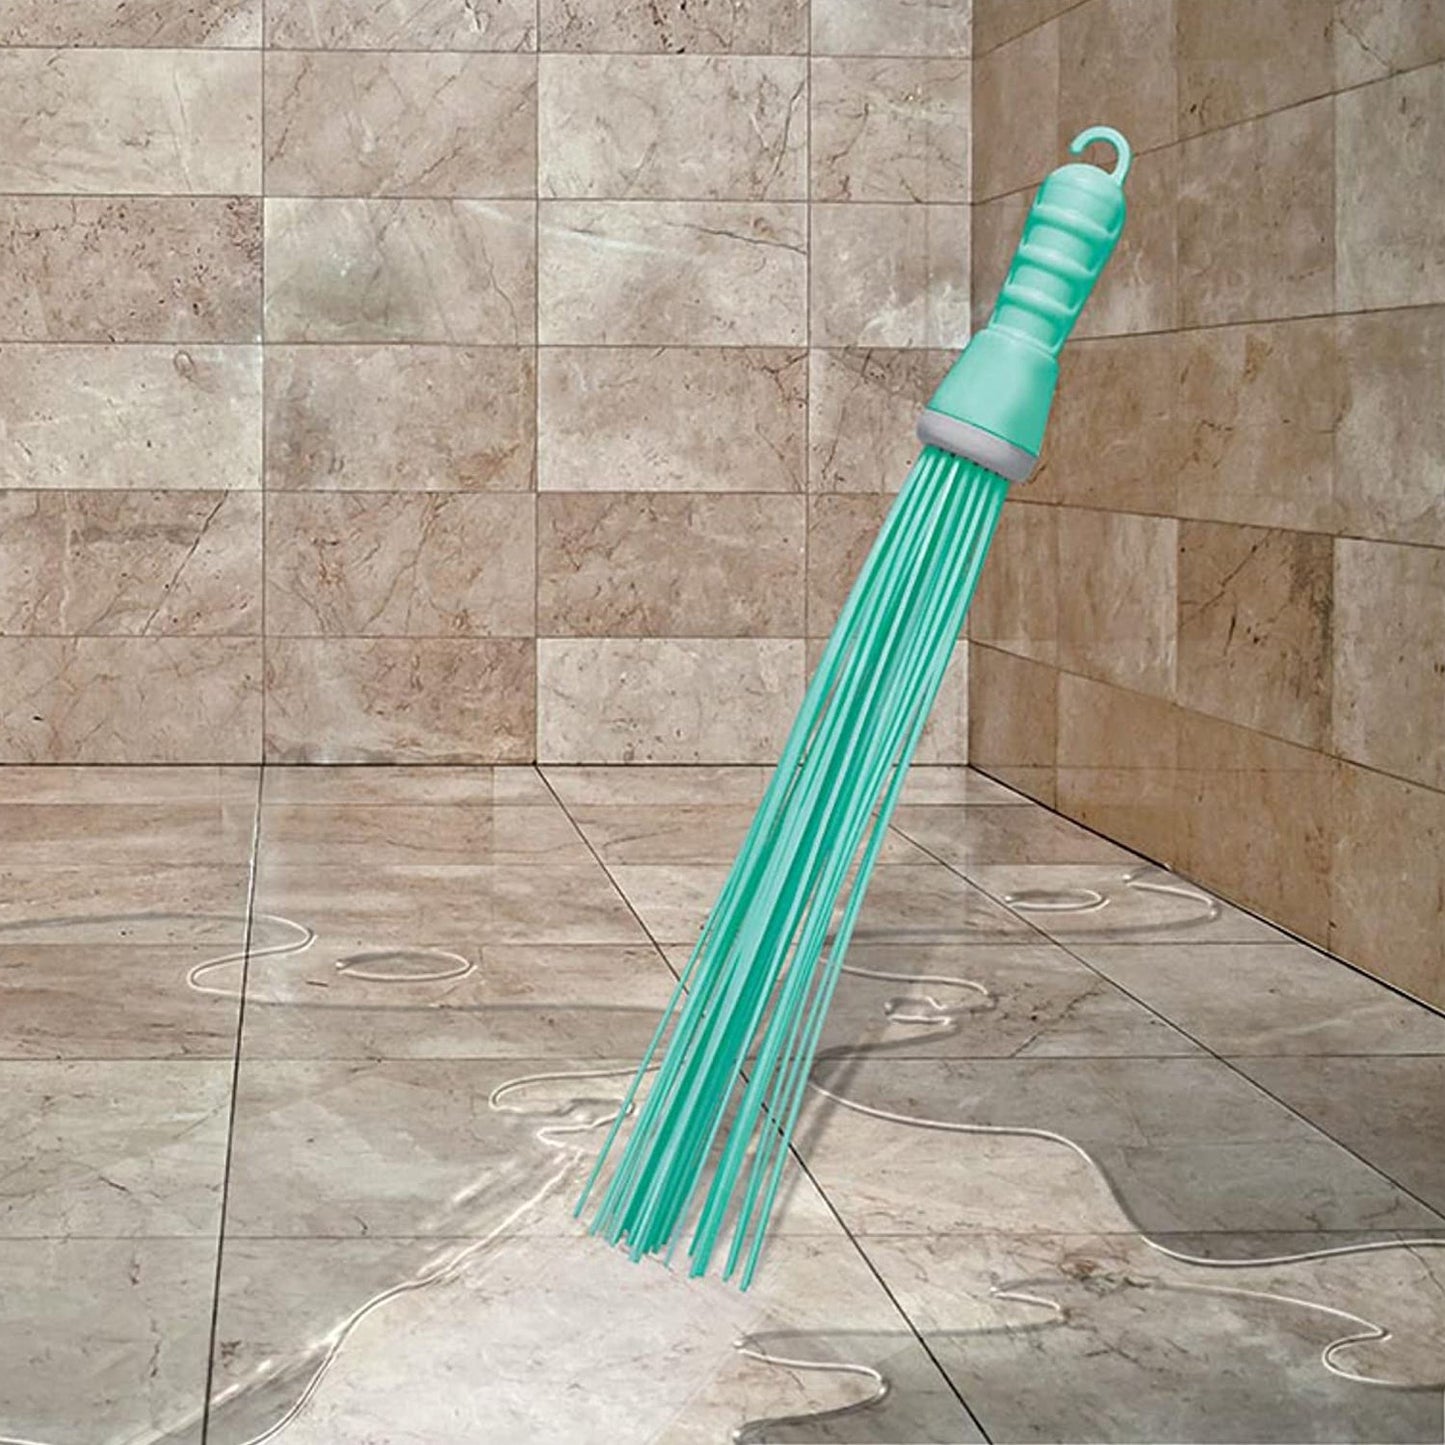 Plastic Hard Bristle Broom for Bathroom Floor Cleaning and Scrubbing, Wet and Dry Floor Cleaning